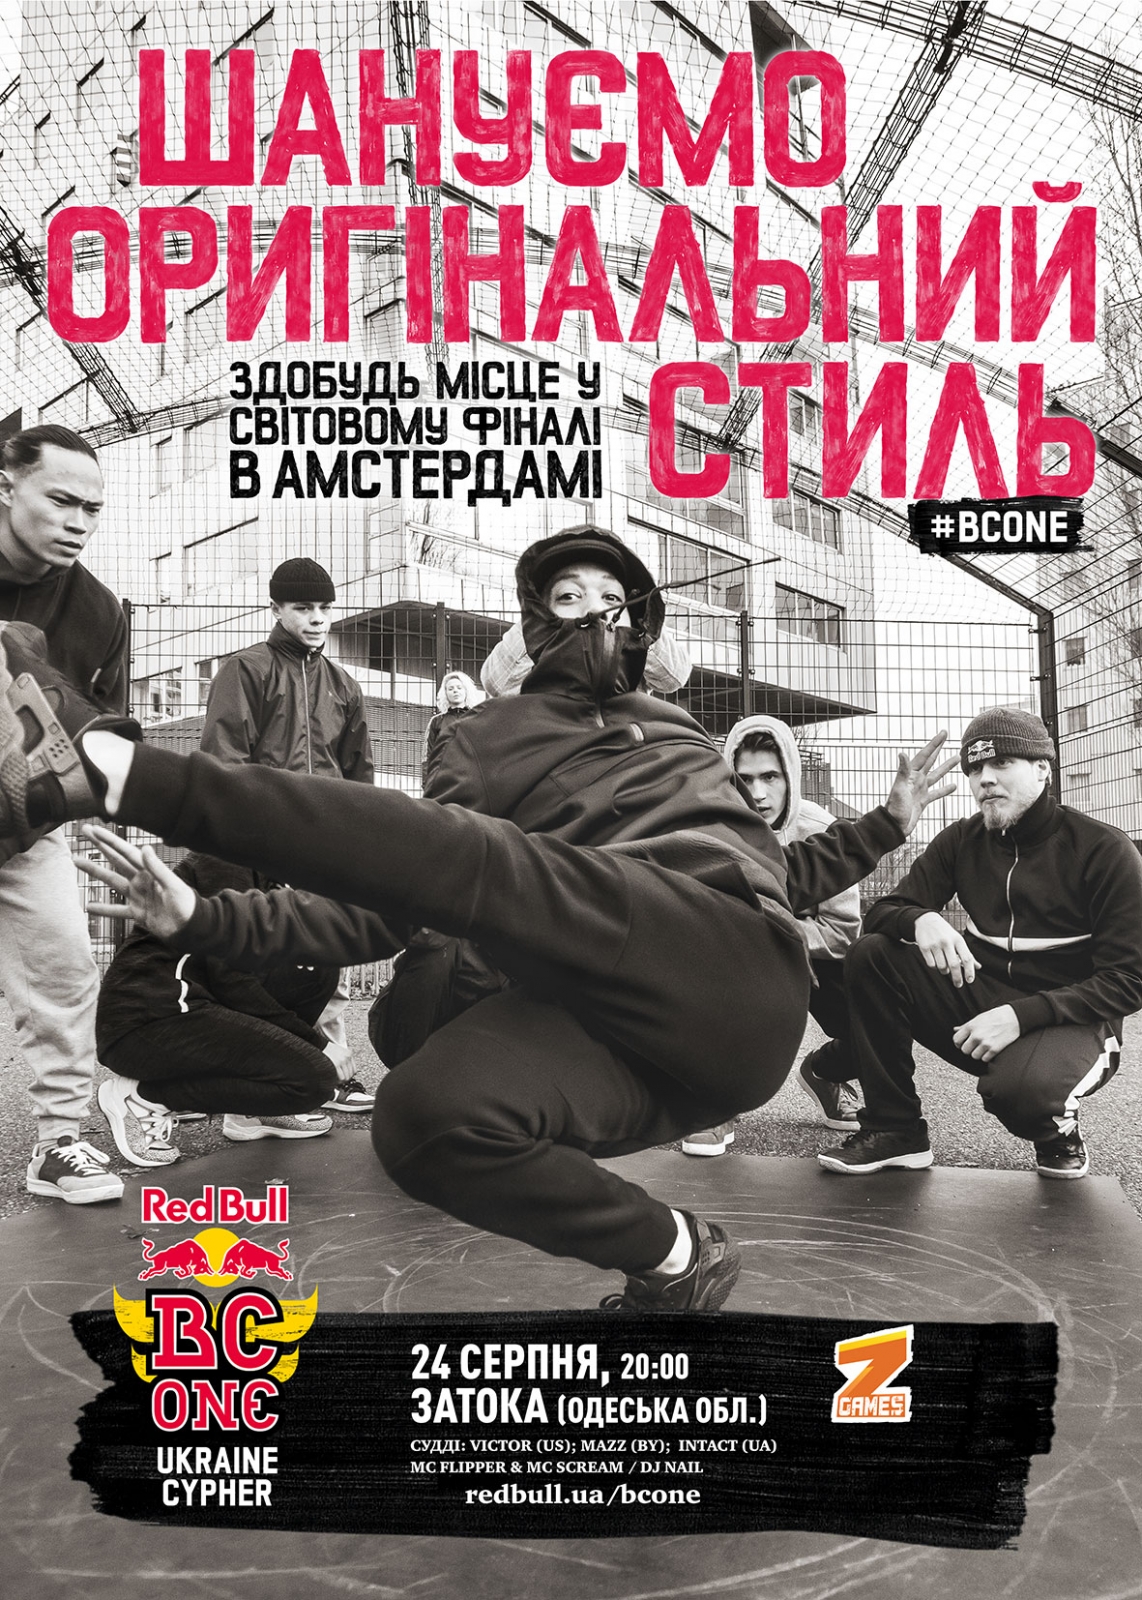 Red Bull BC One Ukraine Cypher 2017 poster